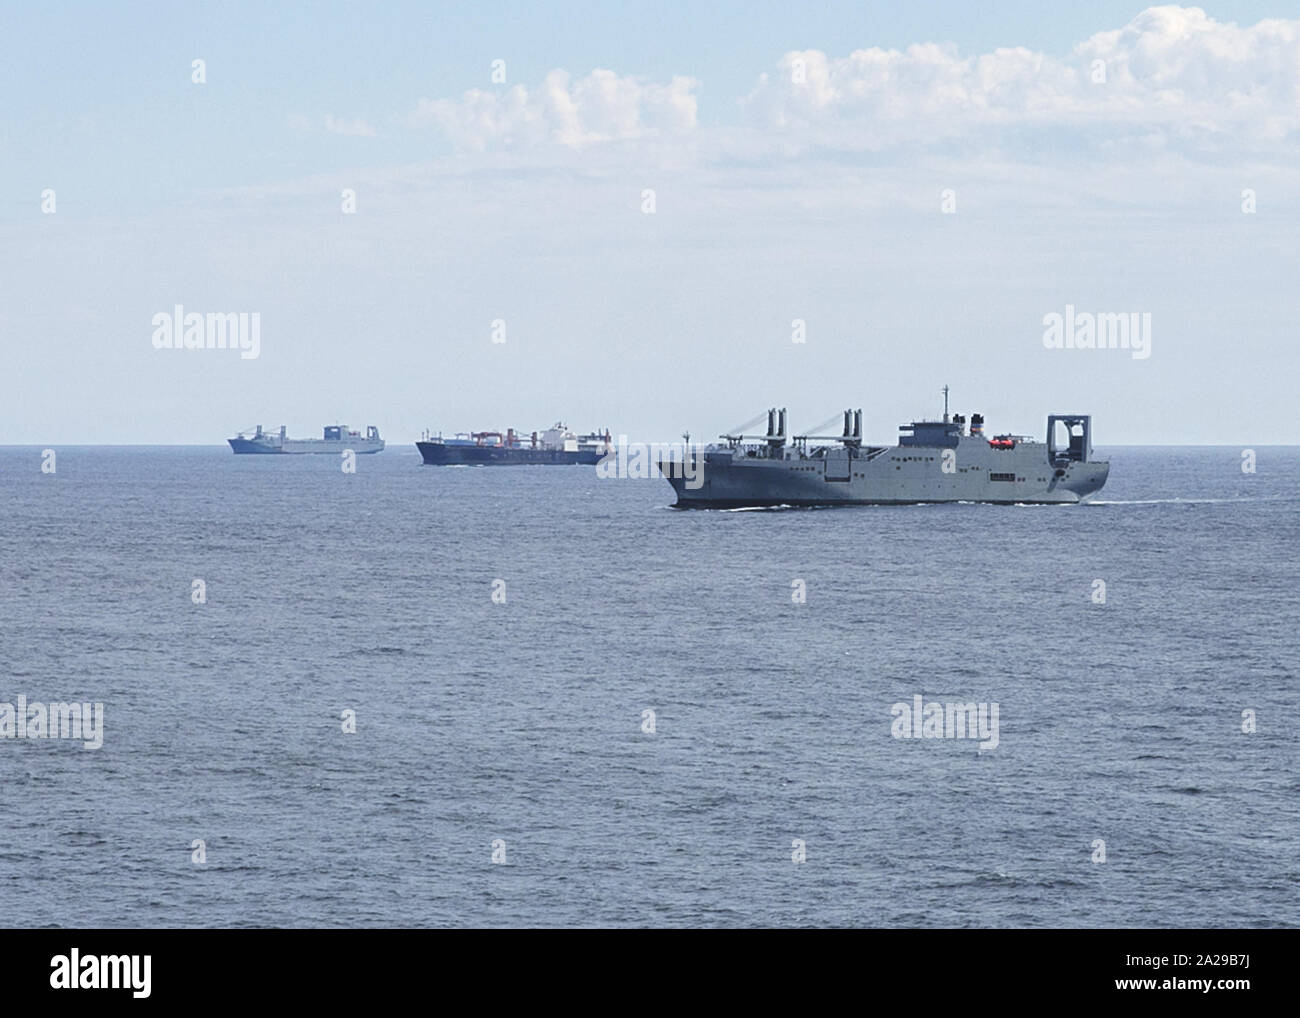 190924-N-BI924-9978  CHESAPEAKE BAY (Sept. 24, 2019) Military Sealift Command, from left to right, large, medium-speed roll-on/roll-off vessel USNS Mendonca (T-AKR 303), container and roll-on/roll-off ship USNS PFC Eugene A. Obregon (T-AK 3006), and large, medium-speed roll-on/roll-off vessel USNS Gilliland (T-AKR 298), participate in a group sail during Turbo Activation. Turbo Activation is a large-scale sealift readiness exercise series, which rapidly activates a mix of Military Sealift Command and U.S. Department of Transportation’s Maritime Administration ships on the East, West, and Gulf Stock Photo